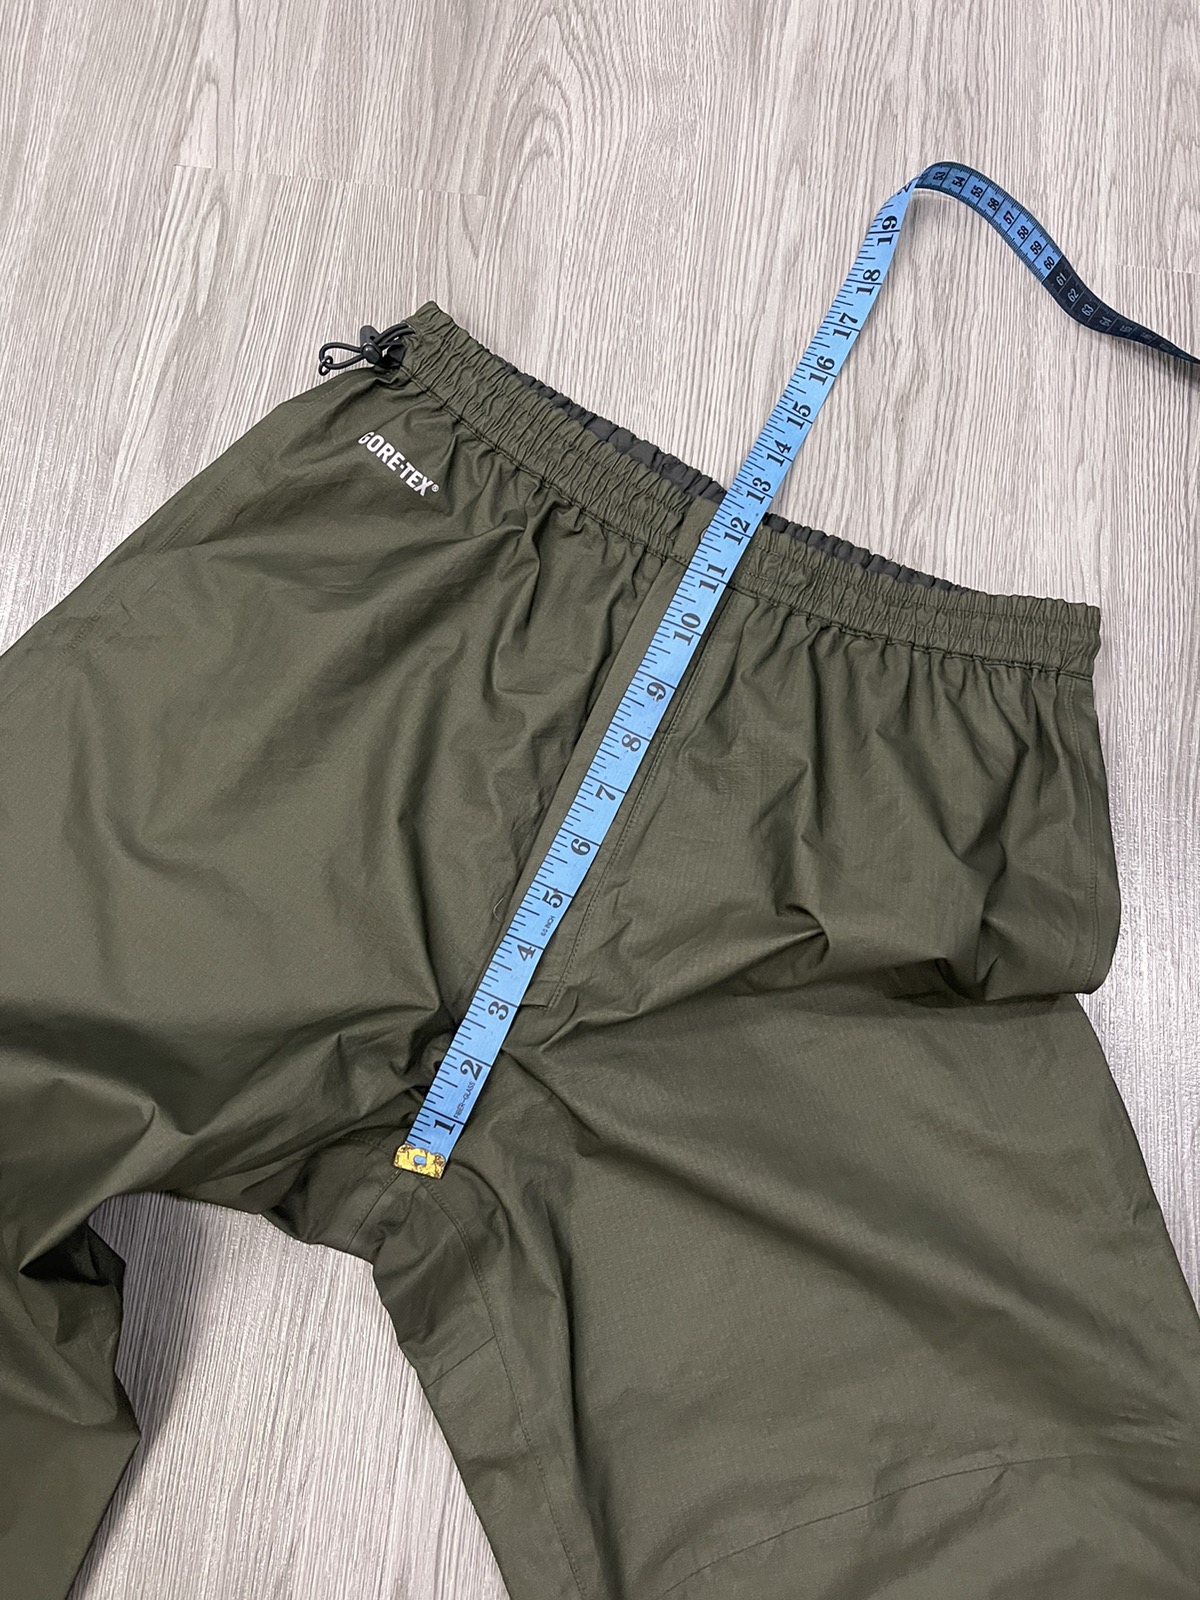 Gorpcore deal🔥The North Face Goretex pant in green - 13